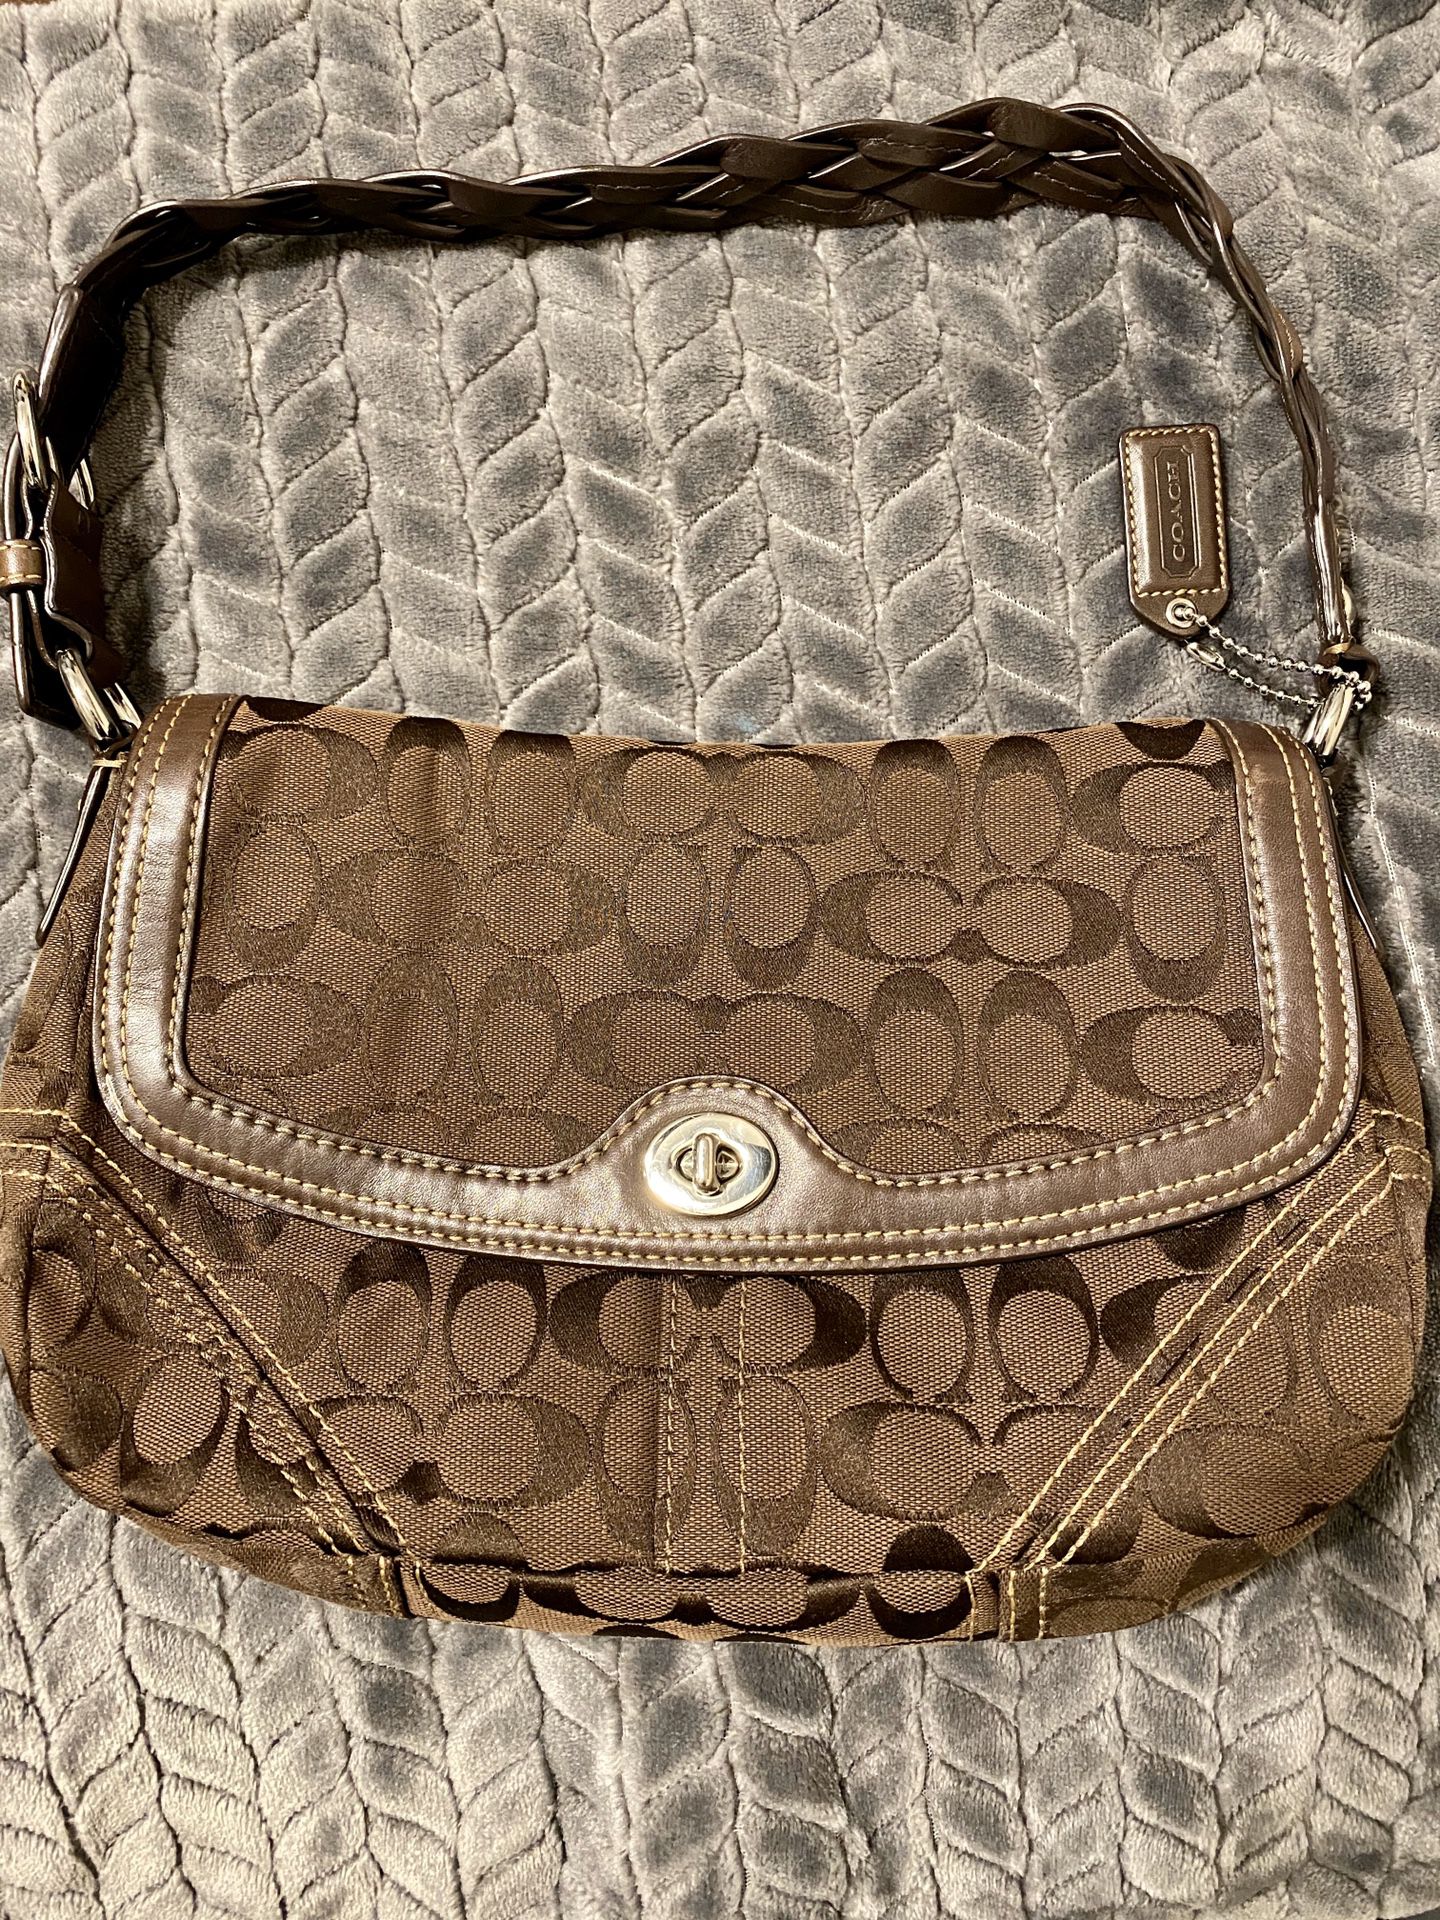 COACH brand purse and wallet